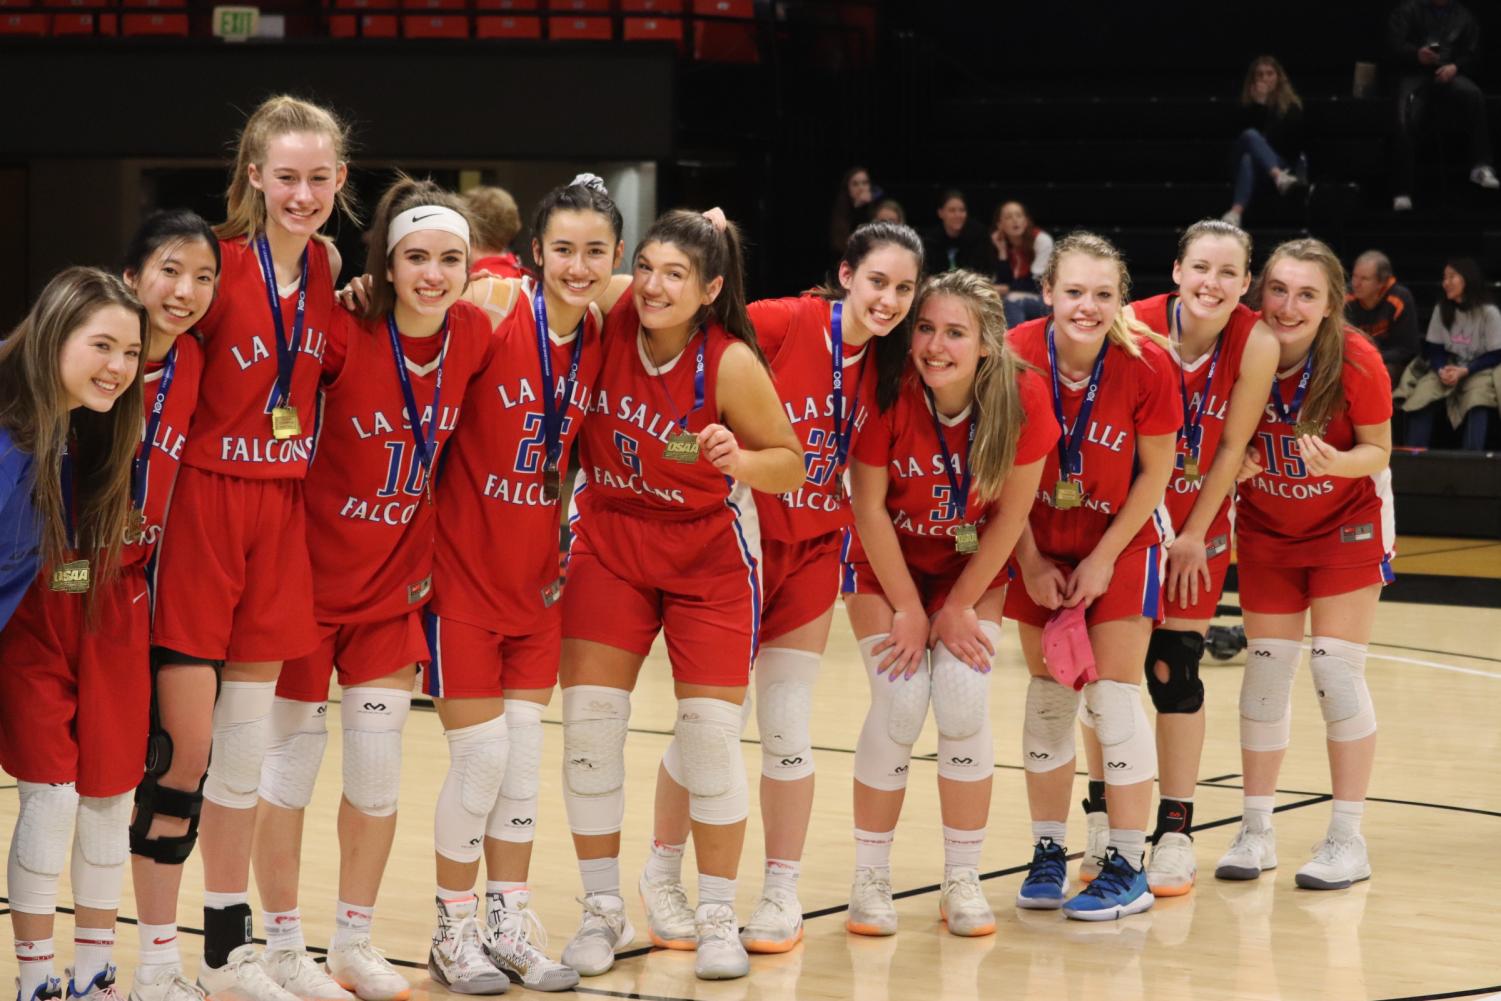 %235+Varsity+Girls+Basketball+Team+Takes+Home+the+State+Championship+Title